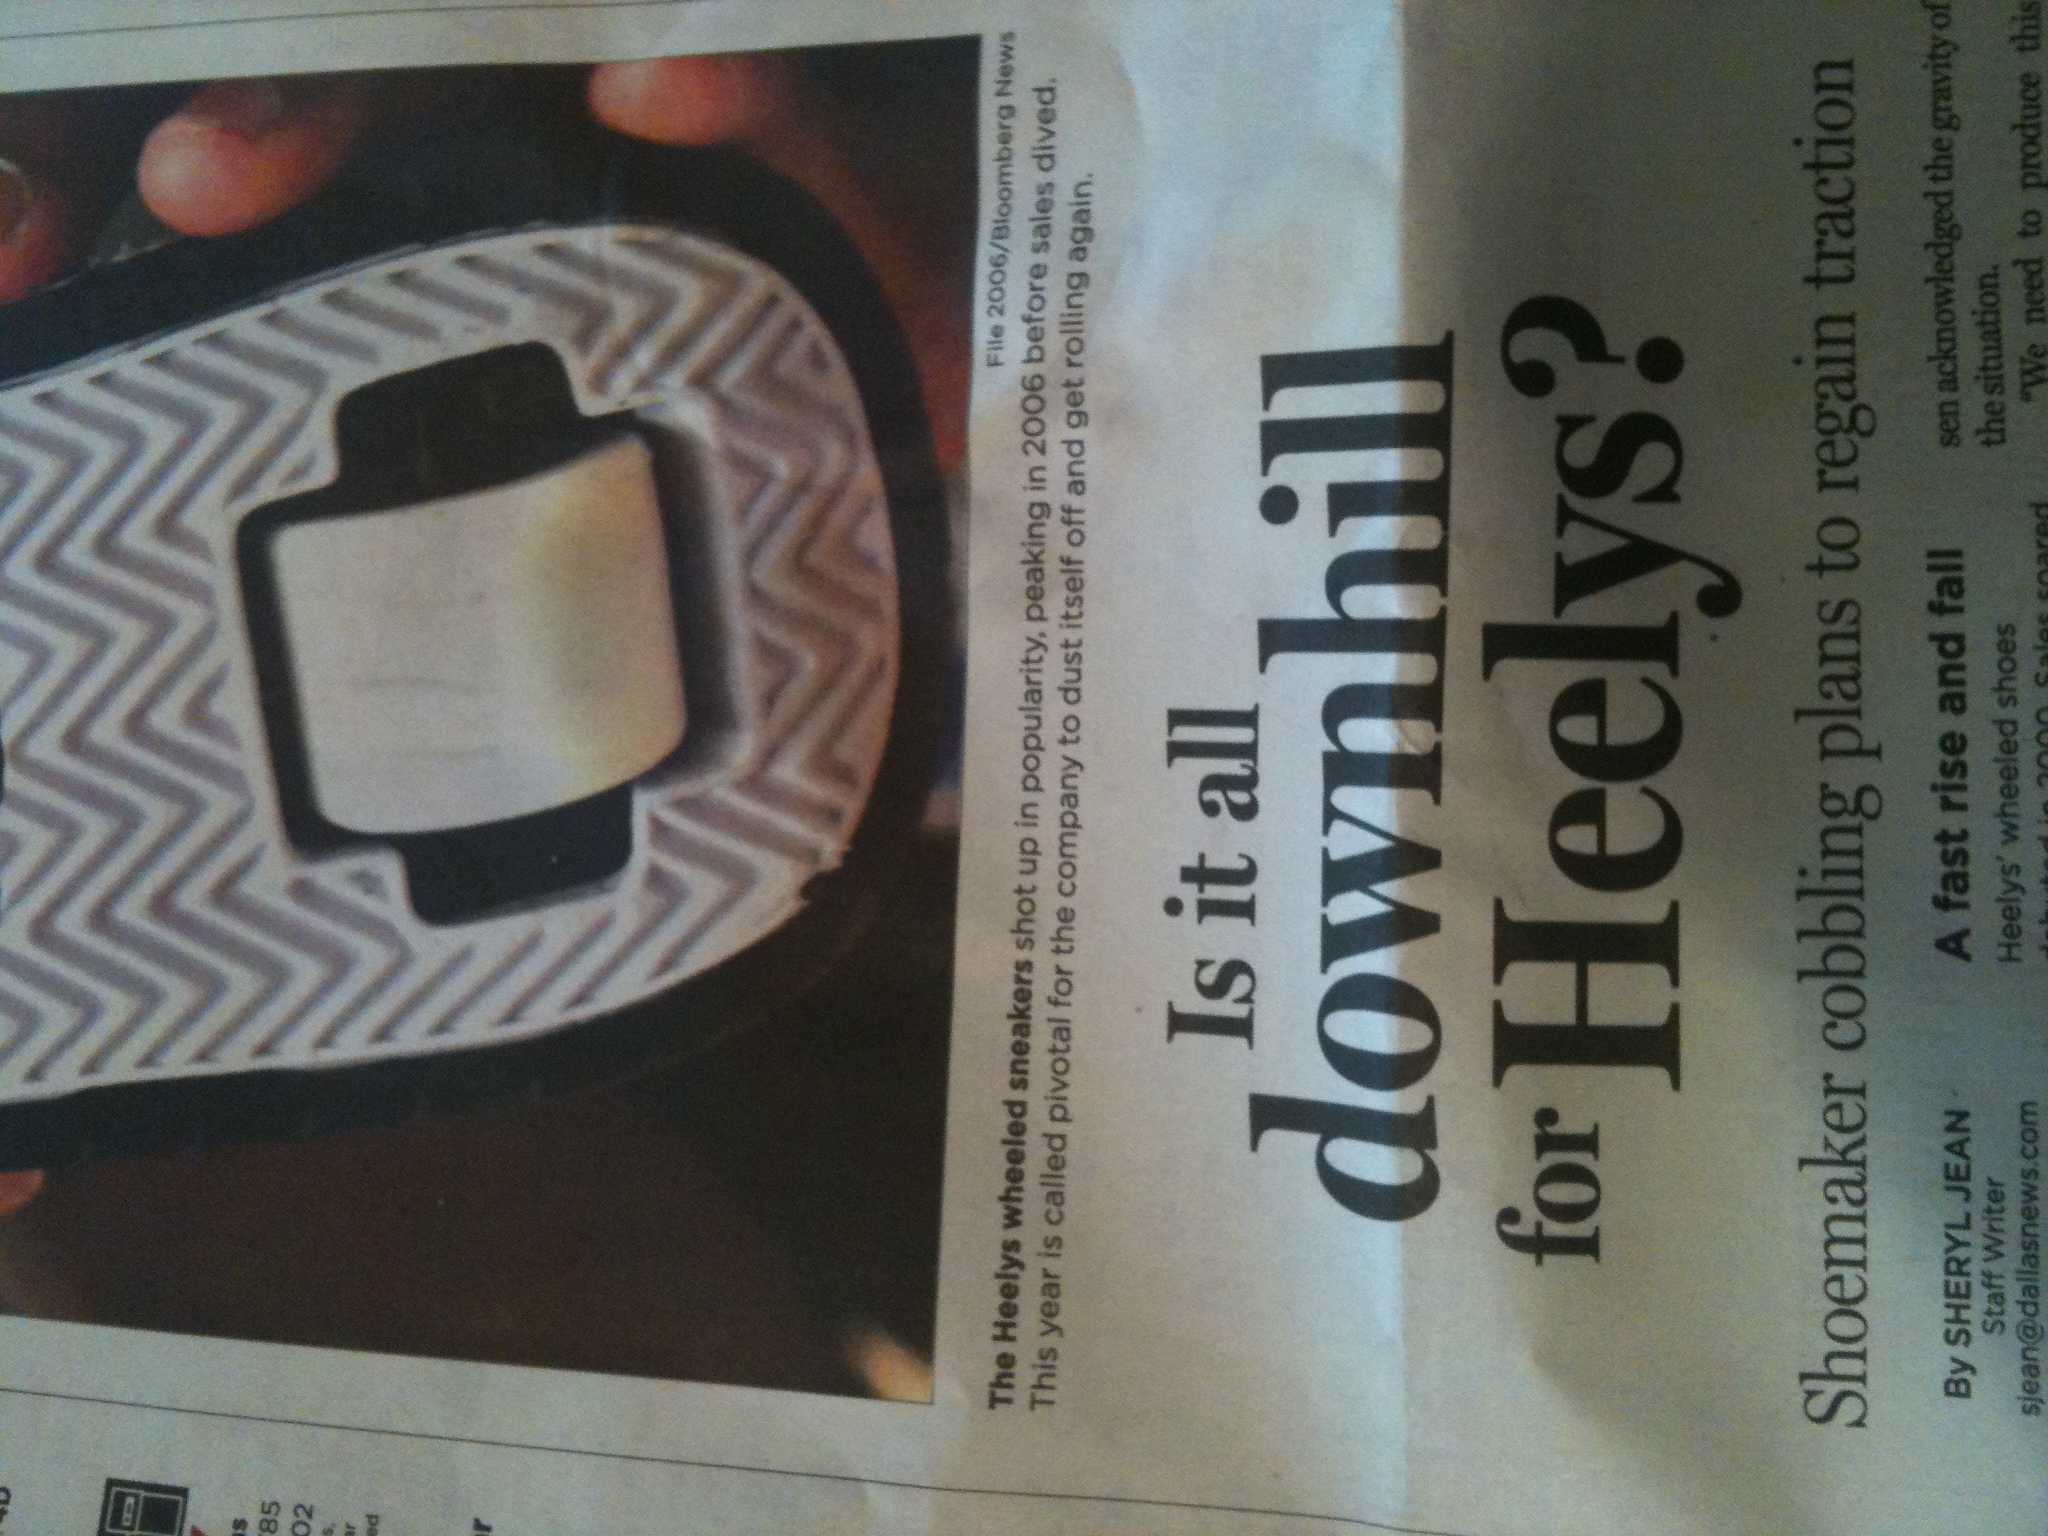 As you can see (probably) from this photo of today's business section, for this story about the sneakers-with-wheels company Heelys, they managed to squeeze a pun into the cutline for the photo, the headline, AND the subhead. That is impressive. And if you think I'm being snarky, you really don't have a clue what I do all day. 